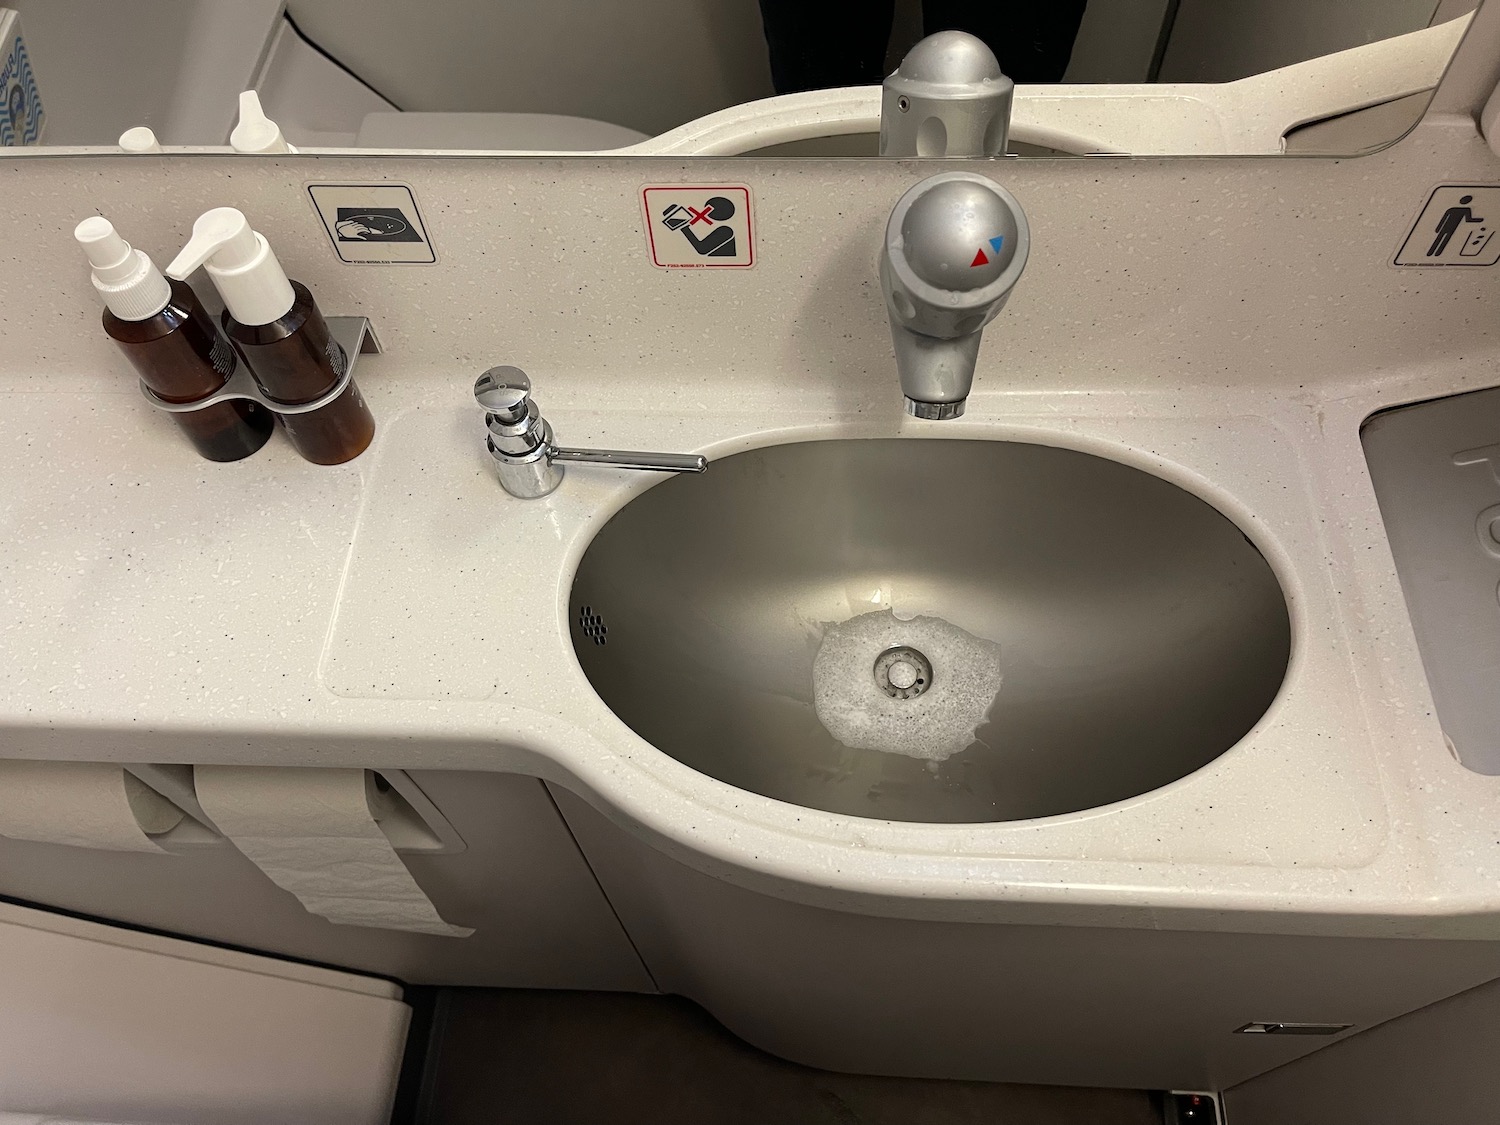 a sink with soap and soap bottles on the side